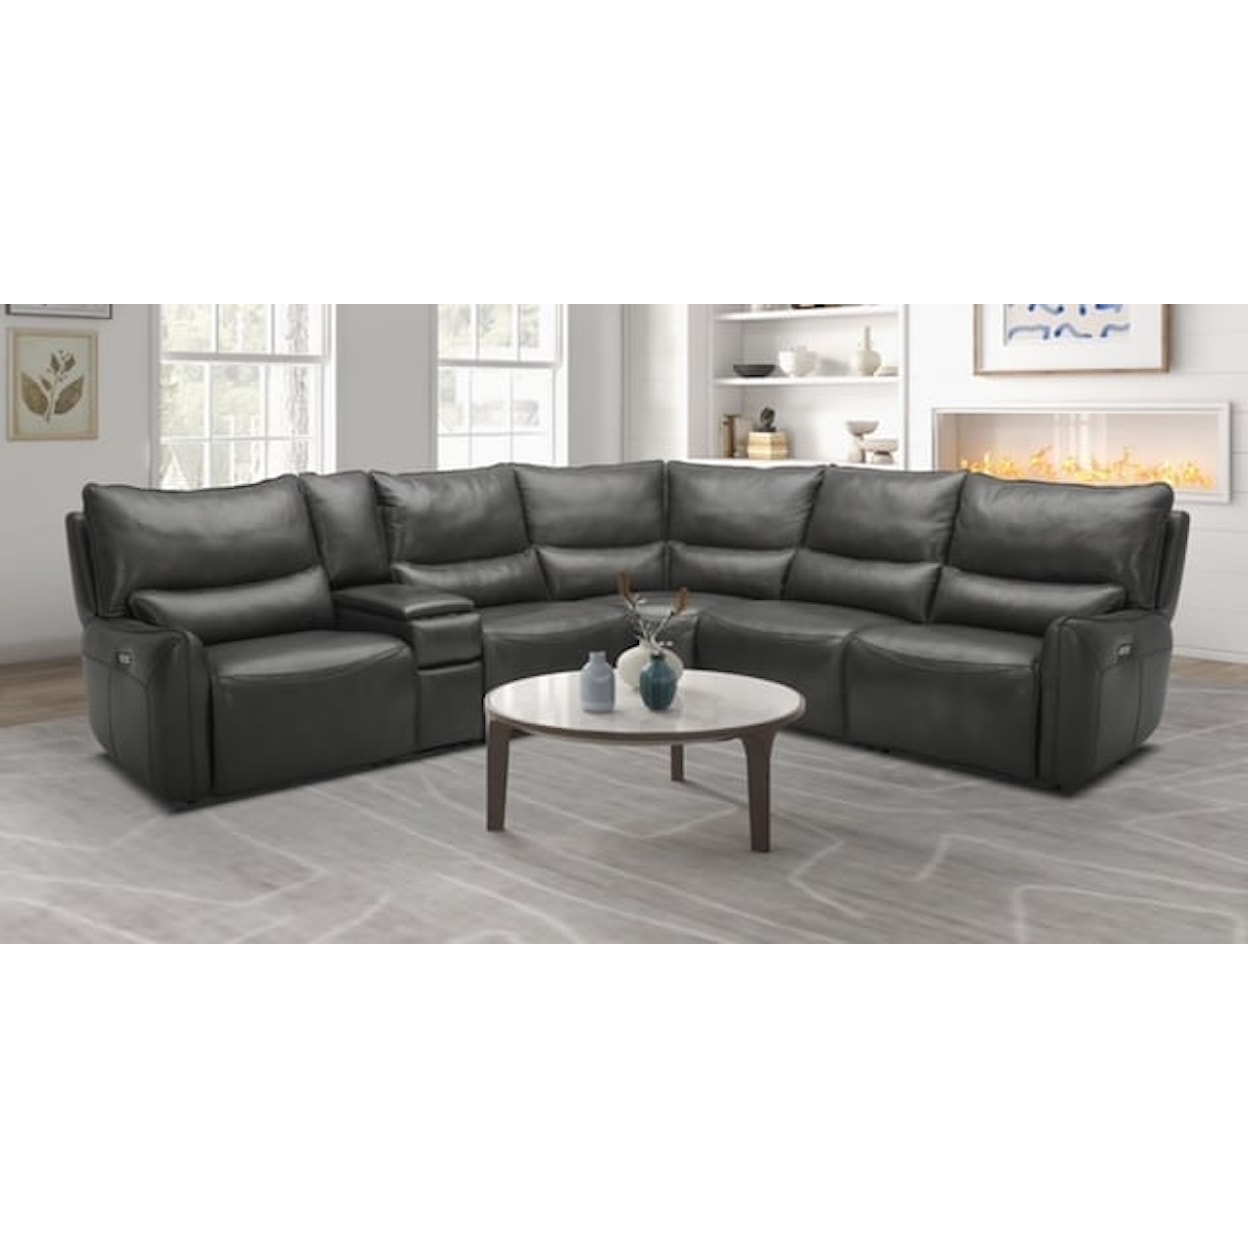 Kuka Home KM.582 Leather Power Sectional - Anthracite